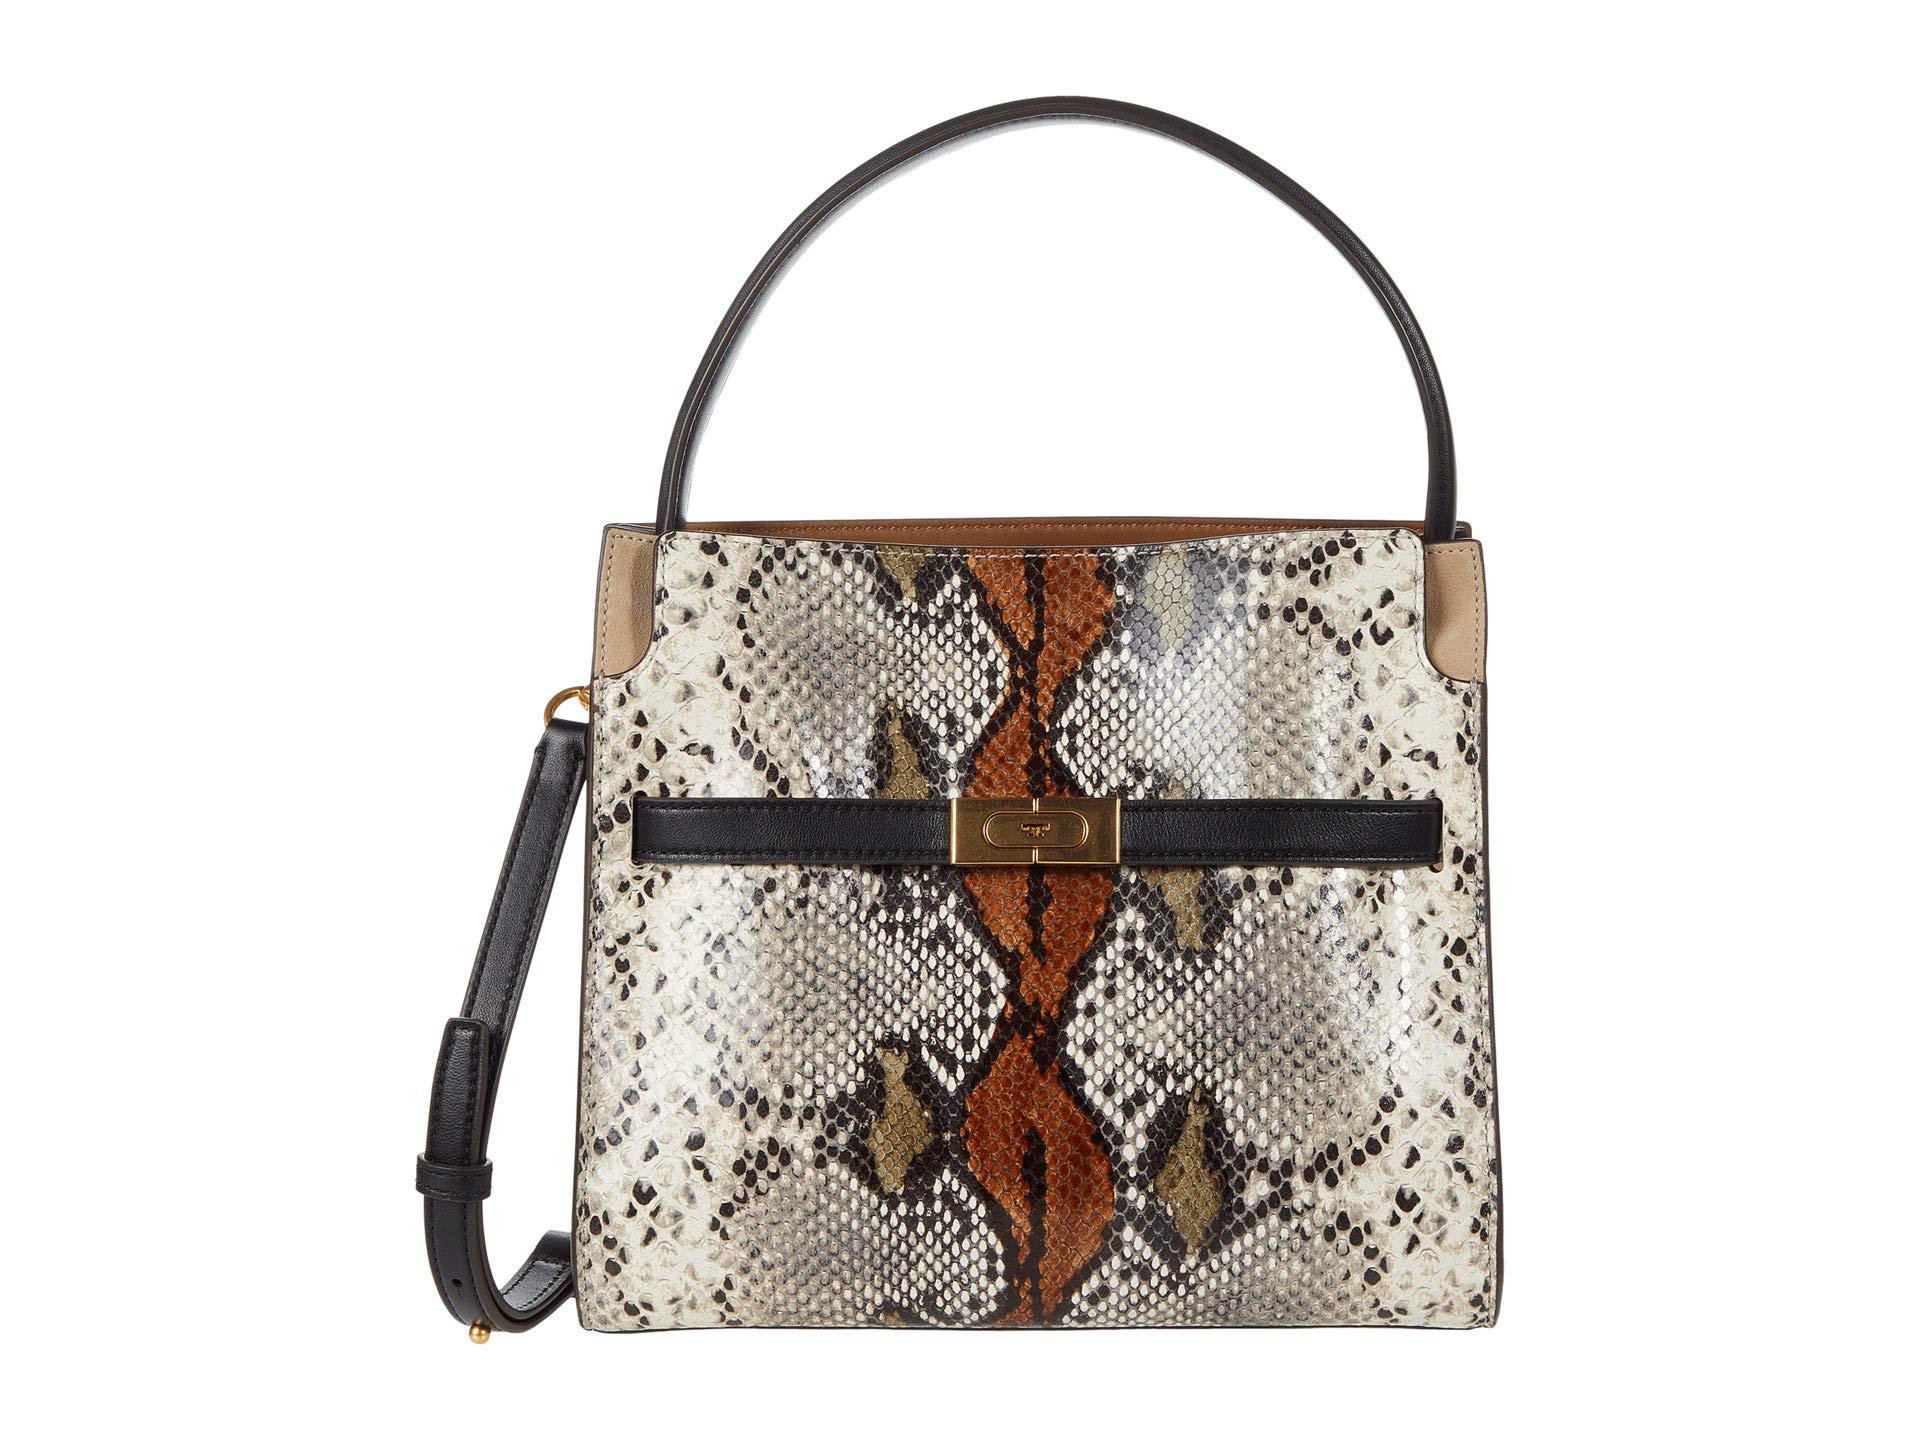 Tory Burch Leather Lee Radziwill Exotic Small Double Bag | Lyst